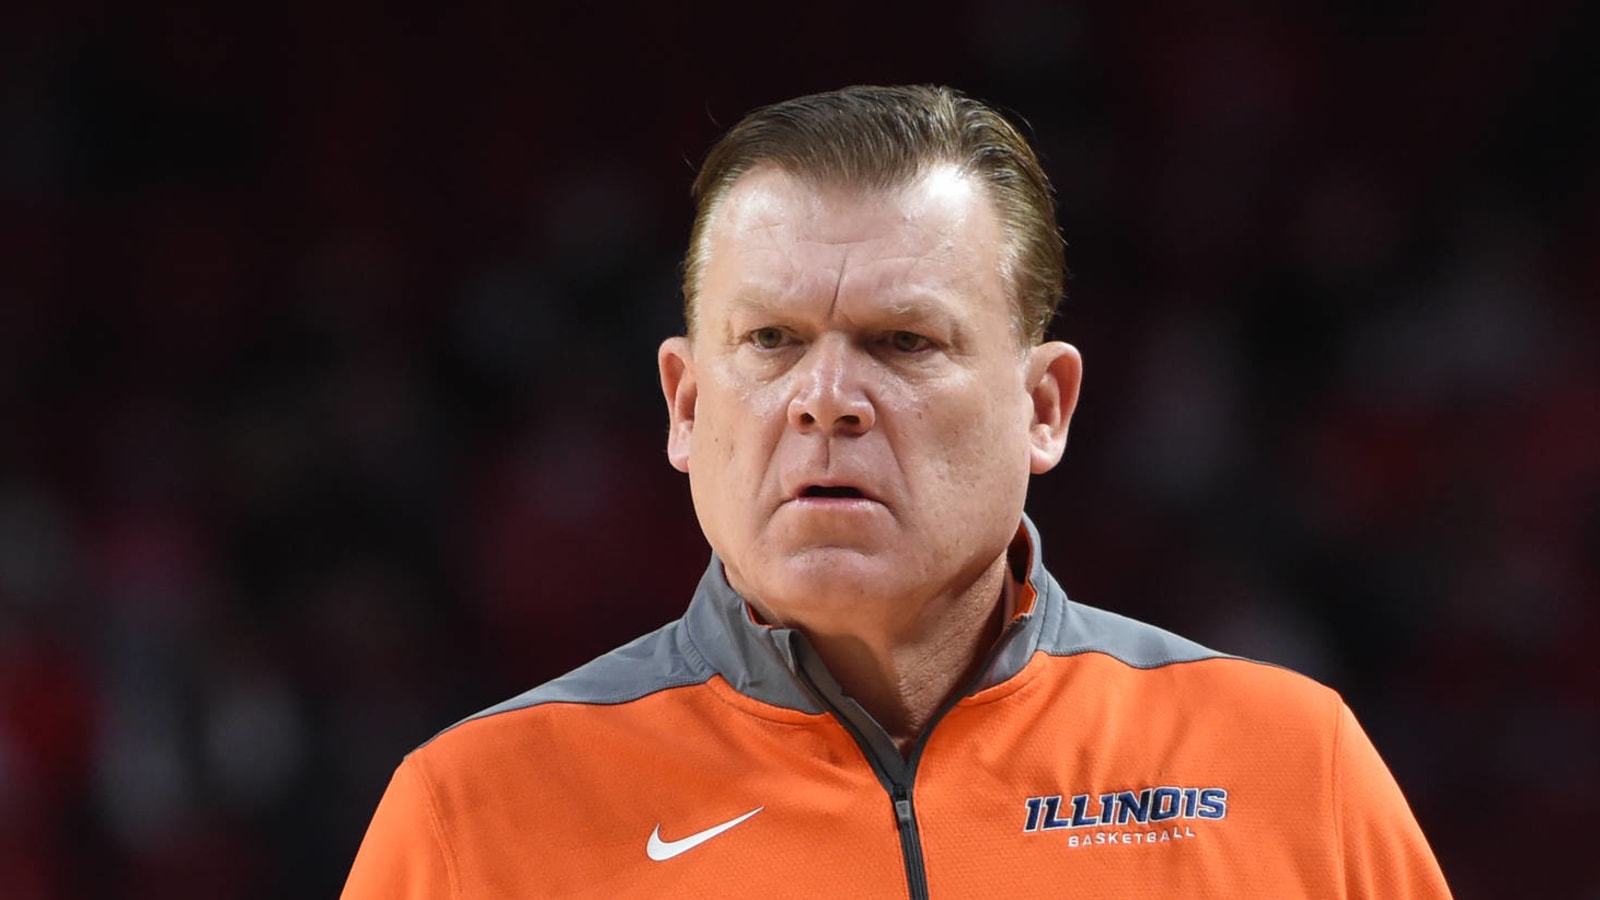 Brad Underwood encouraged Illinois fans to make most of Happy Hour